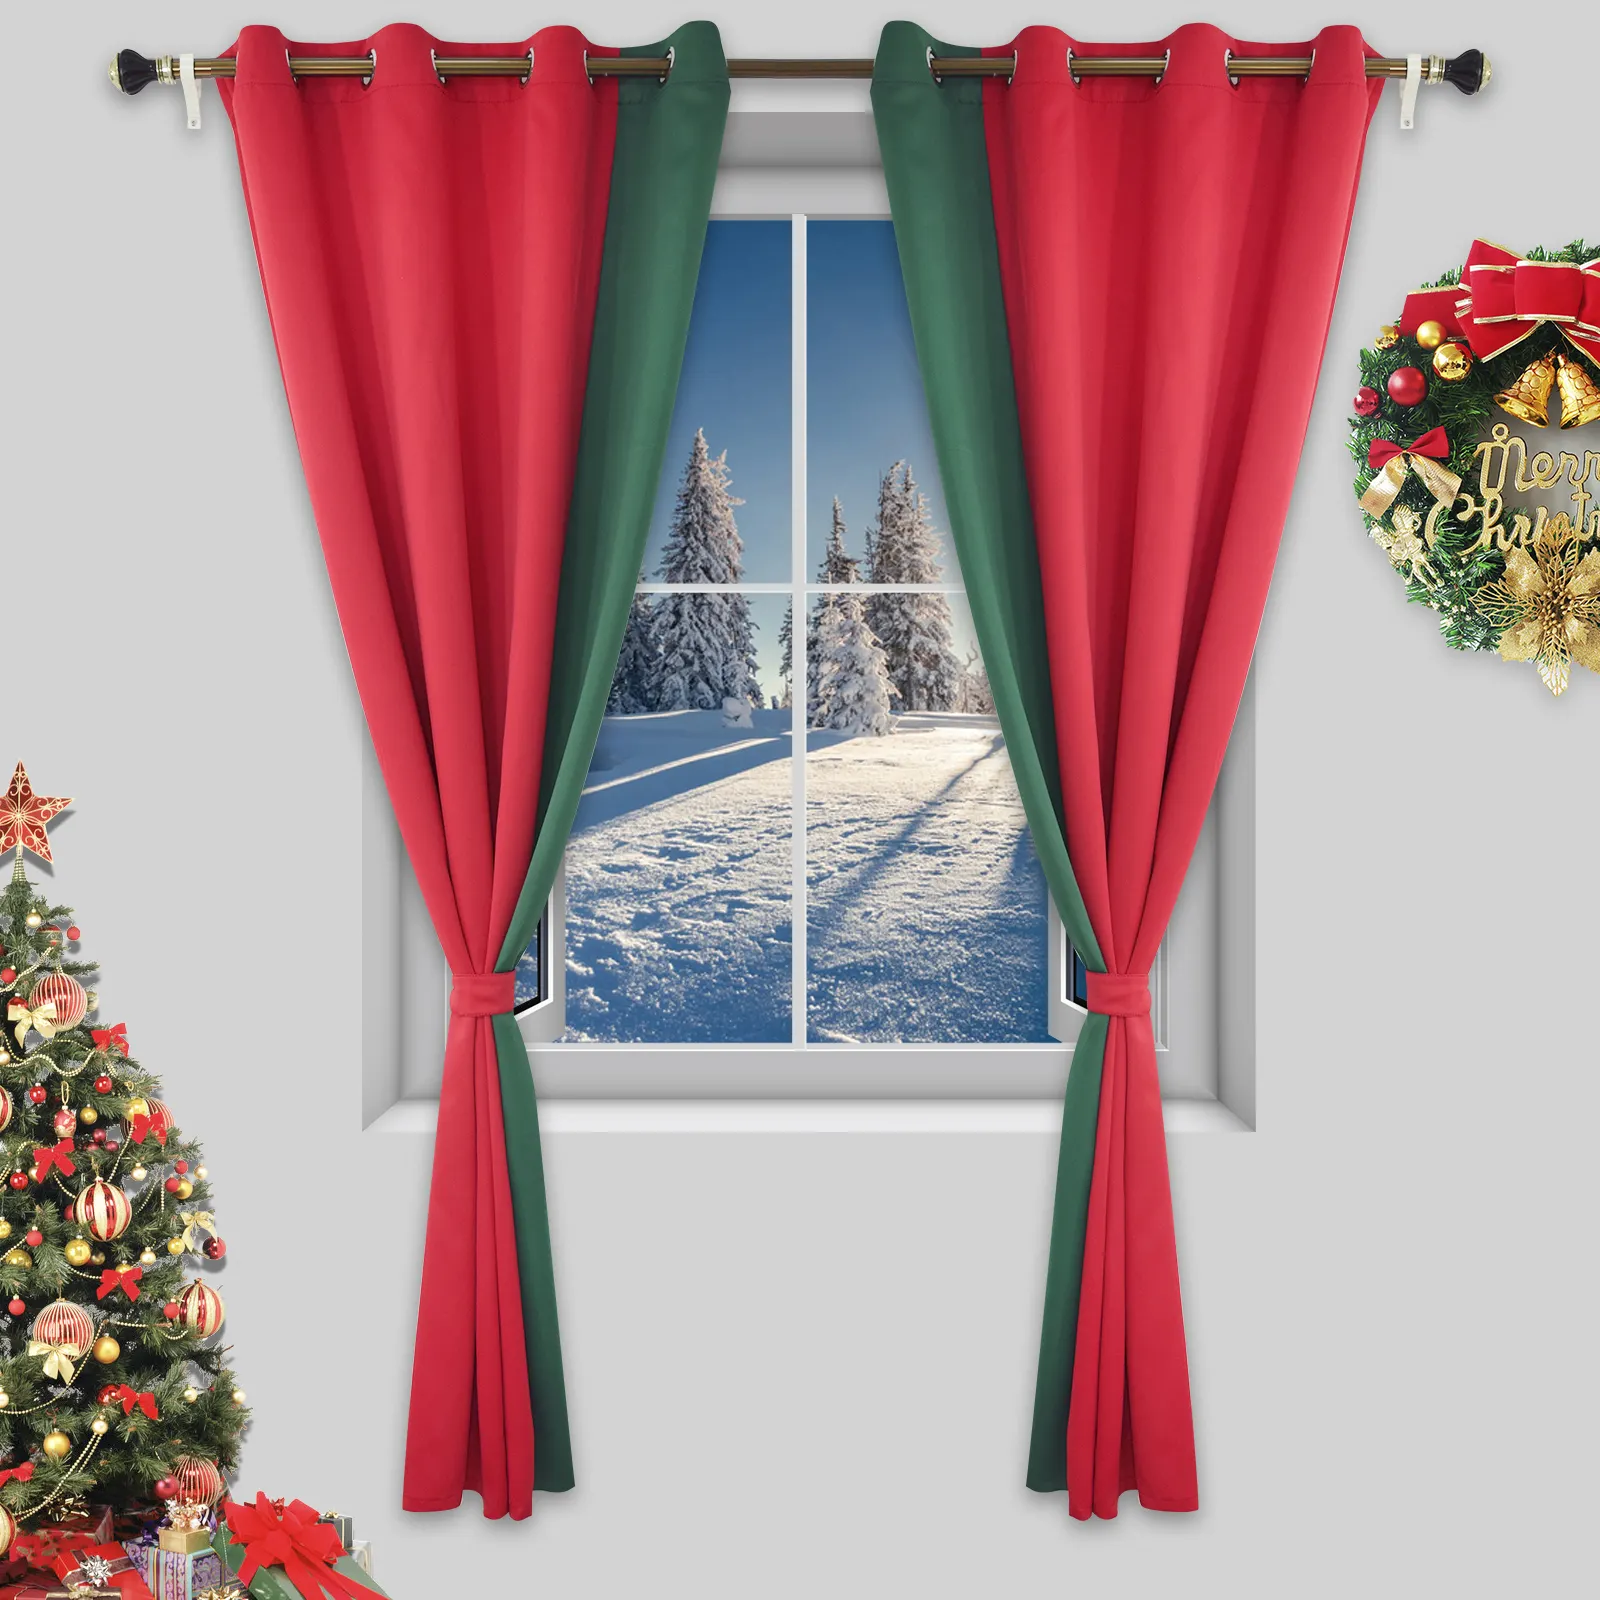 Luxury Solid Fabric Spliced Curtains Classic Style Blackout Green and Red Chrisma Design Curtain For Living Room Bed Room